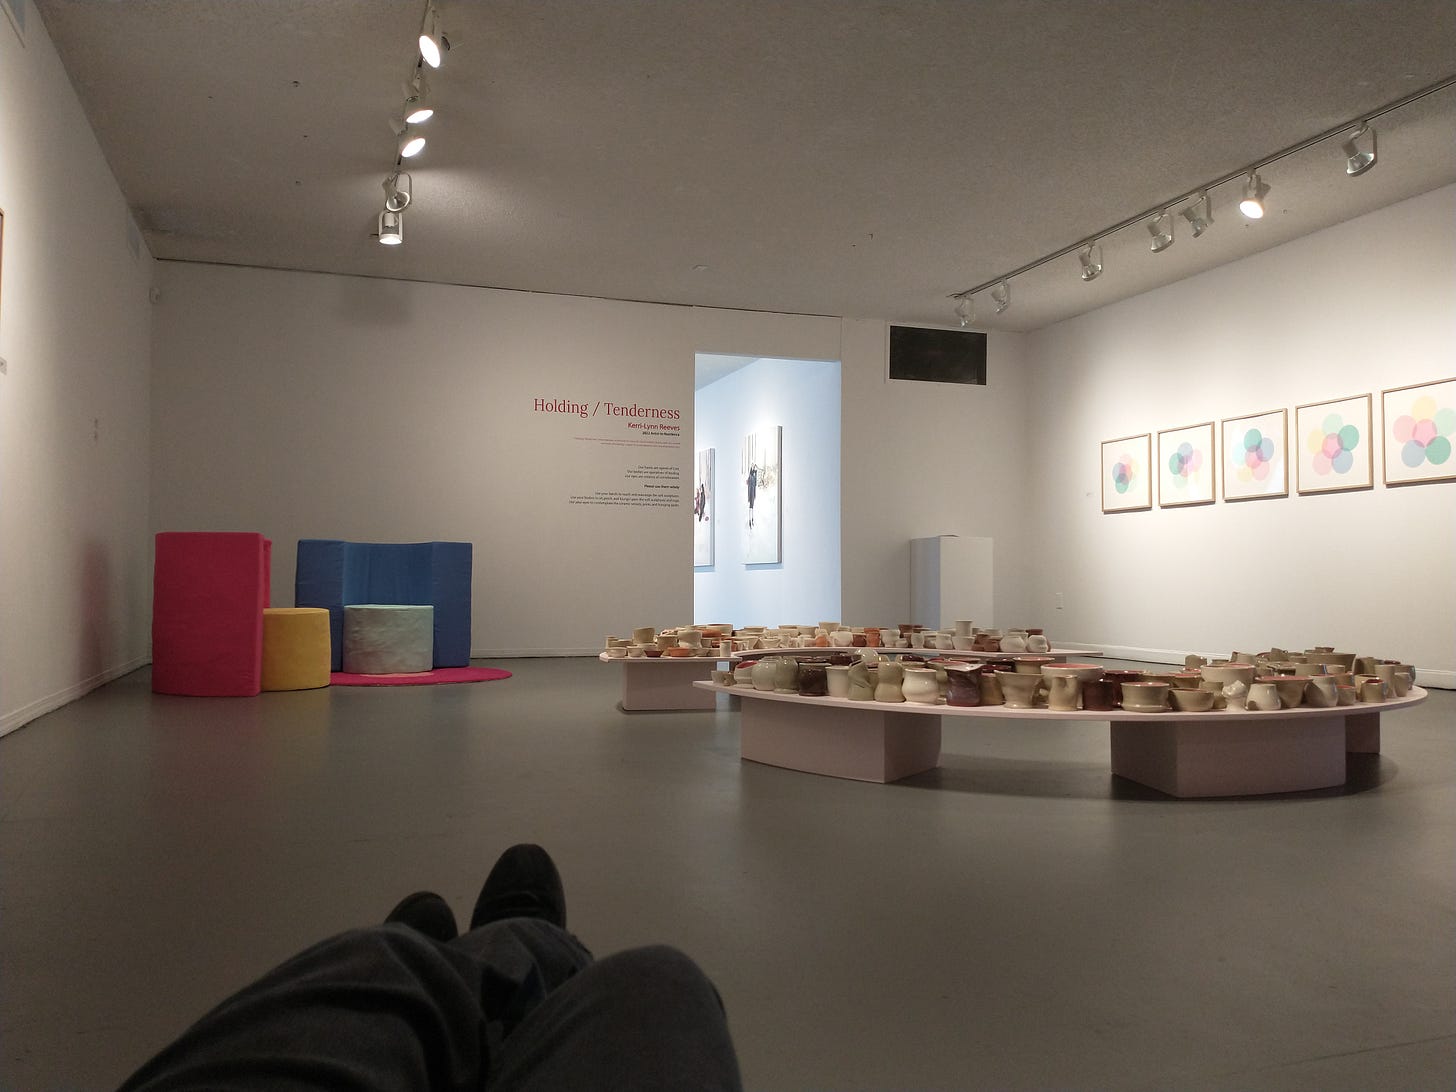 Photograph of Reeves' installation- the title wall is visible, as are one set of soft sculptures, the ceramic pieces on a low shelf, and screenprints on the right.